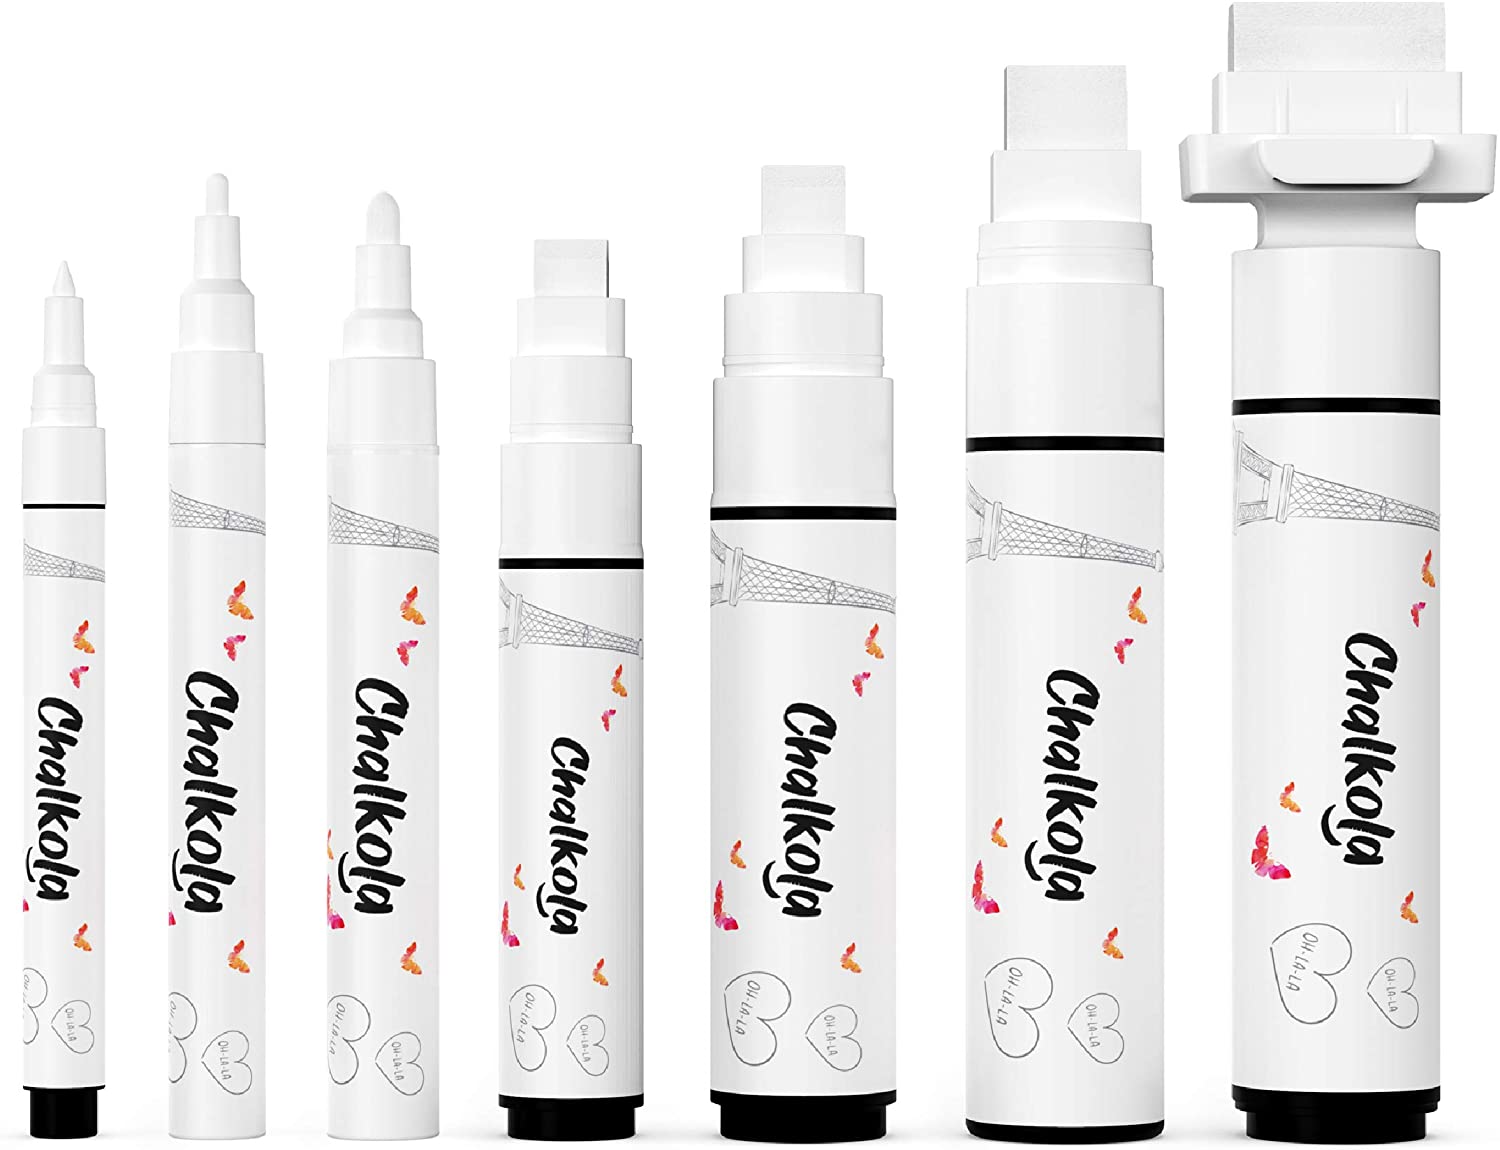  Chalkola White Chalk Markers - White Dry Erase Liquid Chalk  Pens for Chalkboard, Blackboard, Window, Bistro, Car Glass, Board, Signs -  Variety Pack of 6 - (3x) 1mm & 6mm : Office Products